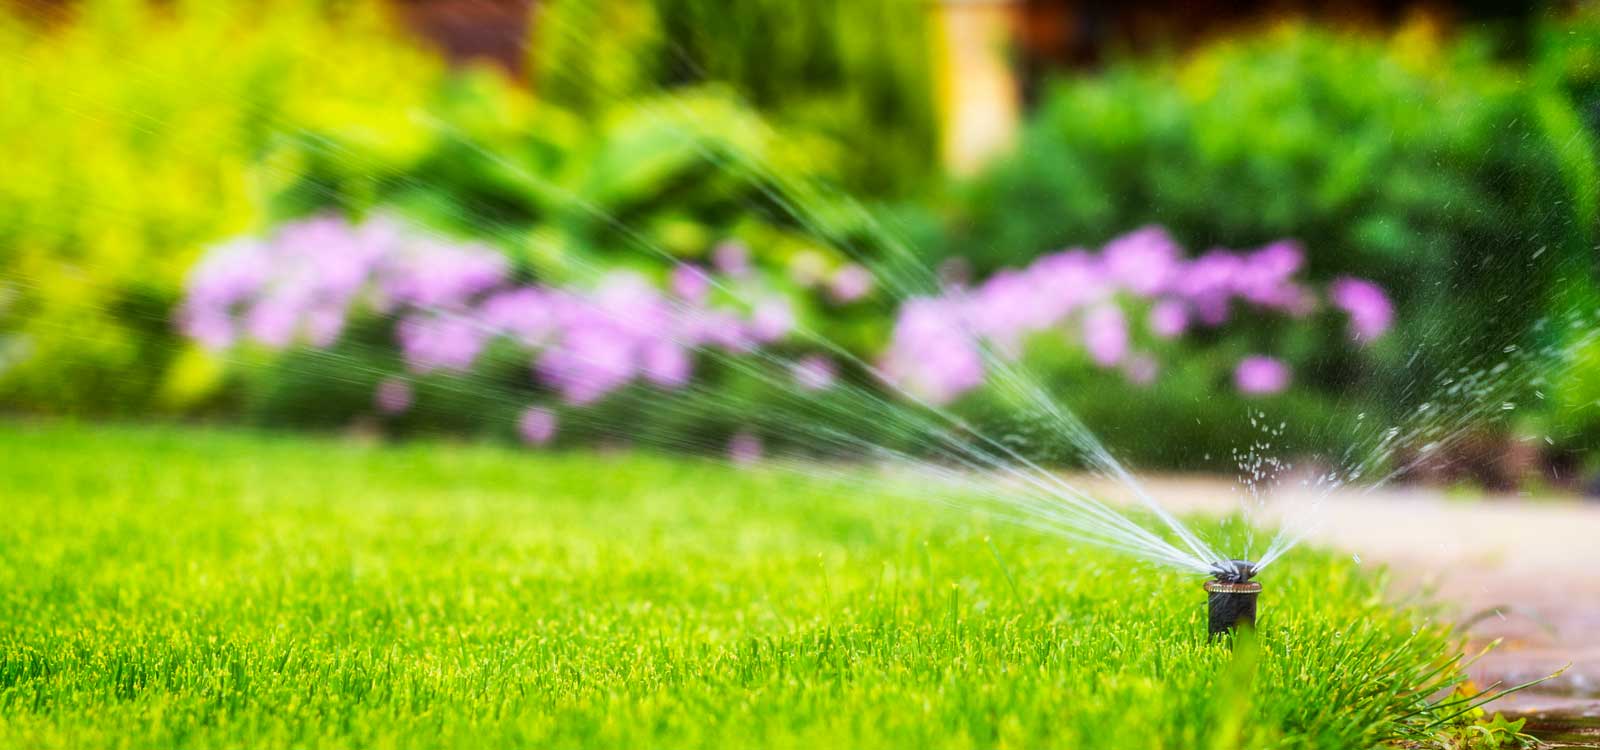 Lawn Watering Guide – Quench Your Lawn’s Thirst